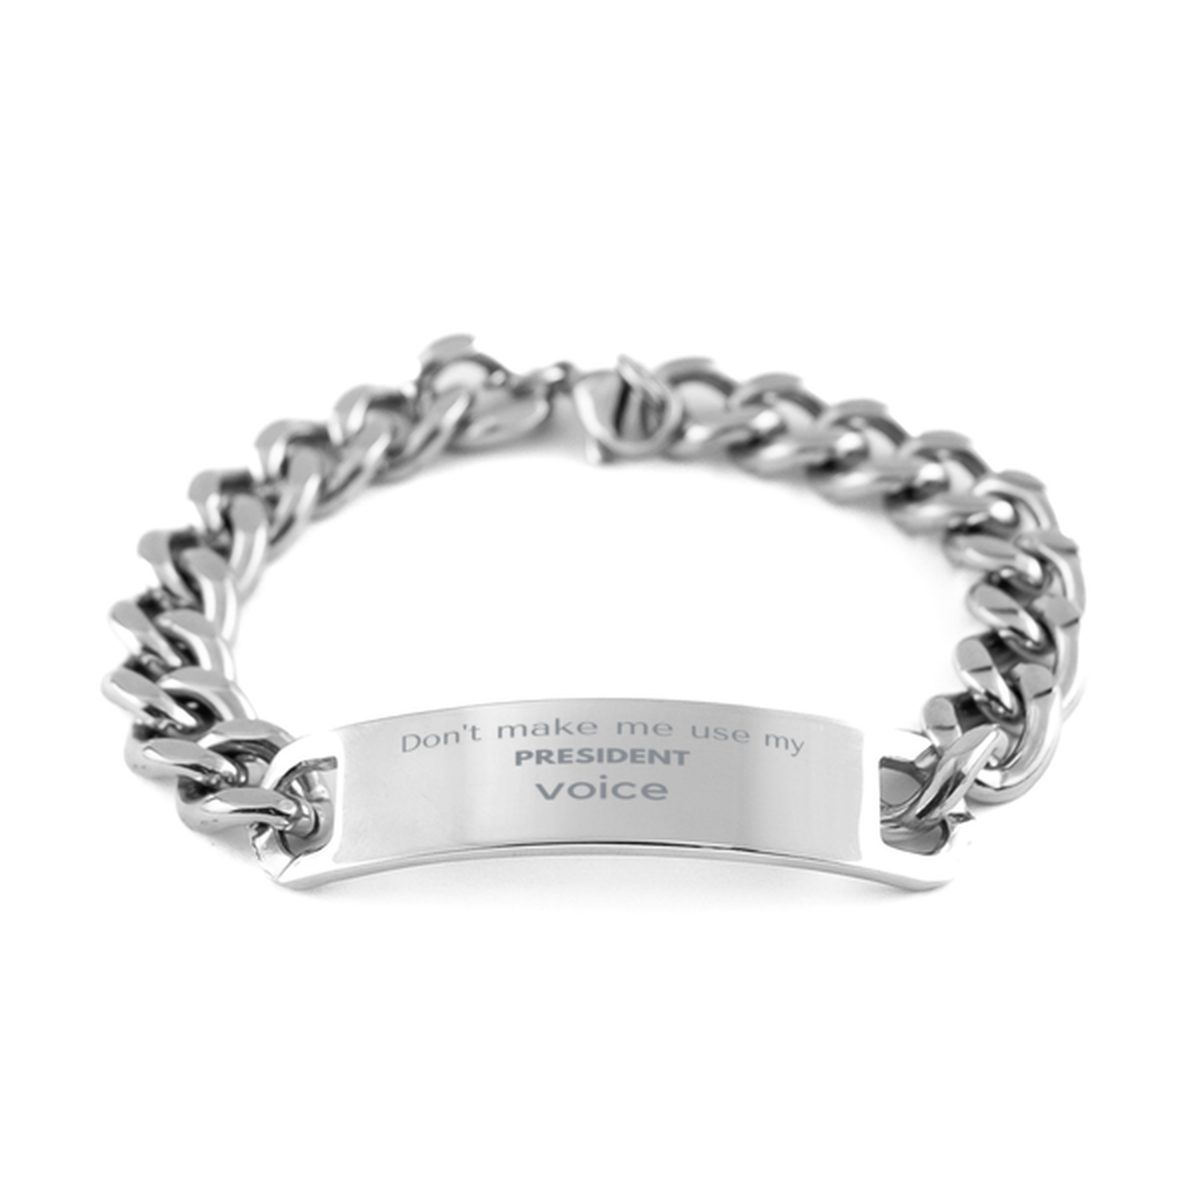 Don't make me use my President voice, Sarcasm President Gifts, Christmas President Cuban Chain Stainless Steel Bracelet Birthday Unique Gifts For President Coworkers, Men, Women, Colleague, Friends